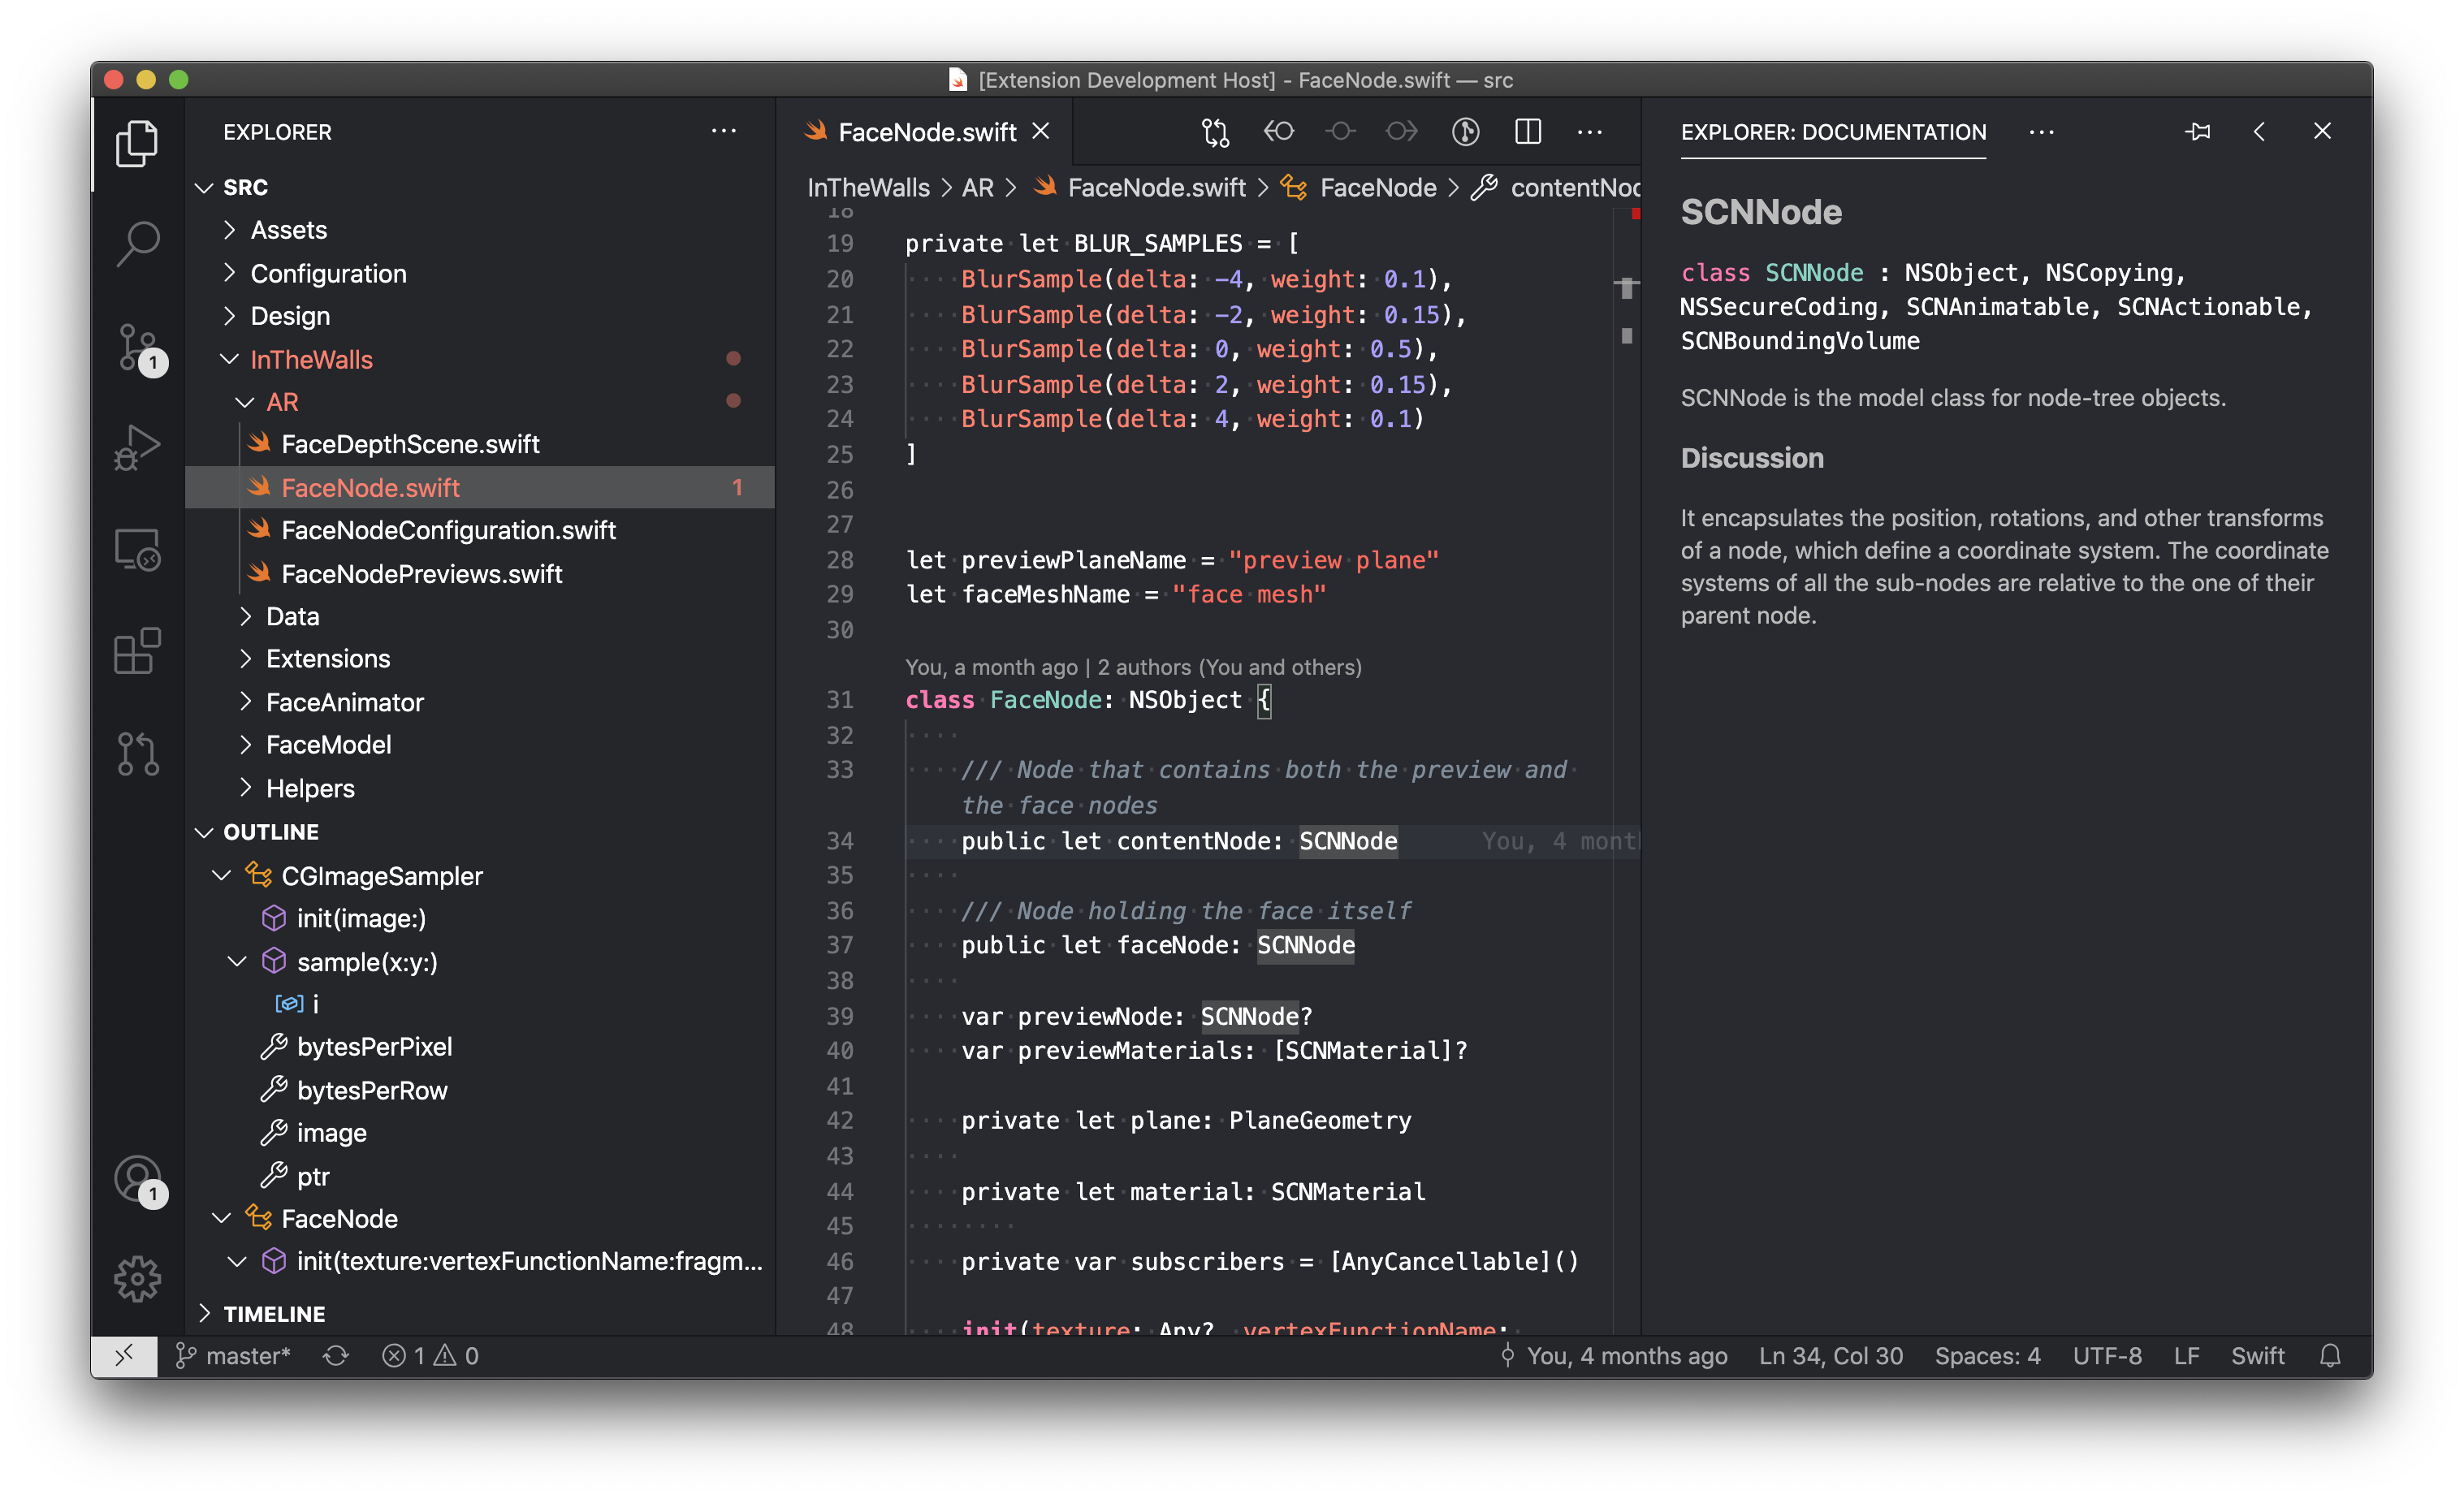 VS Code with a side of docs (thanks to the 'View: Move Panel Right' command).